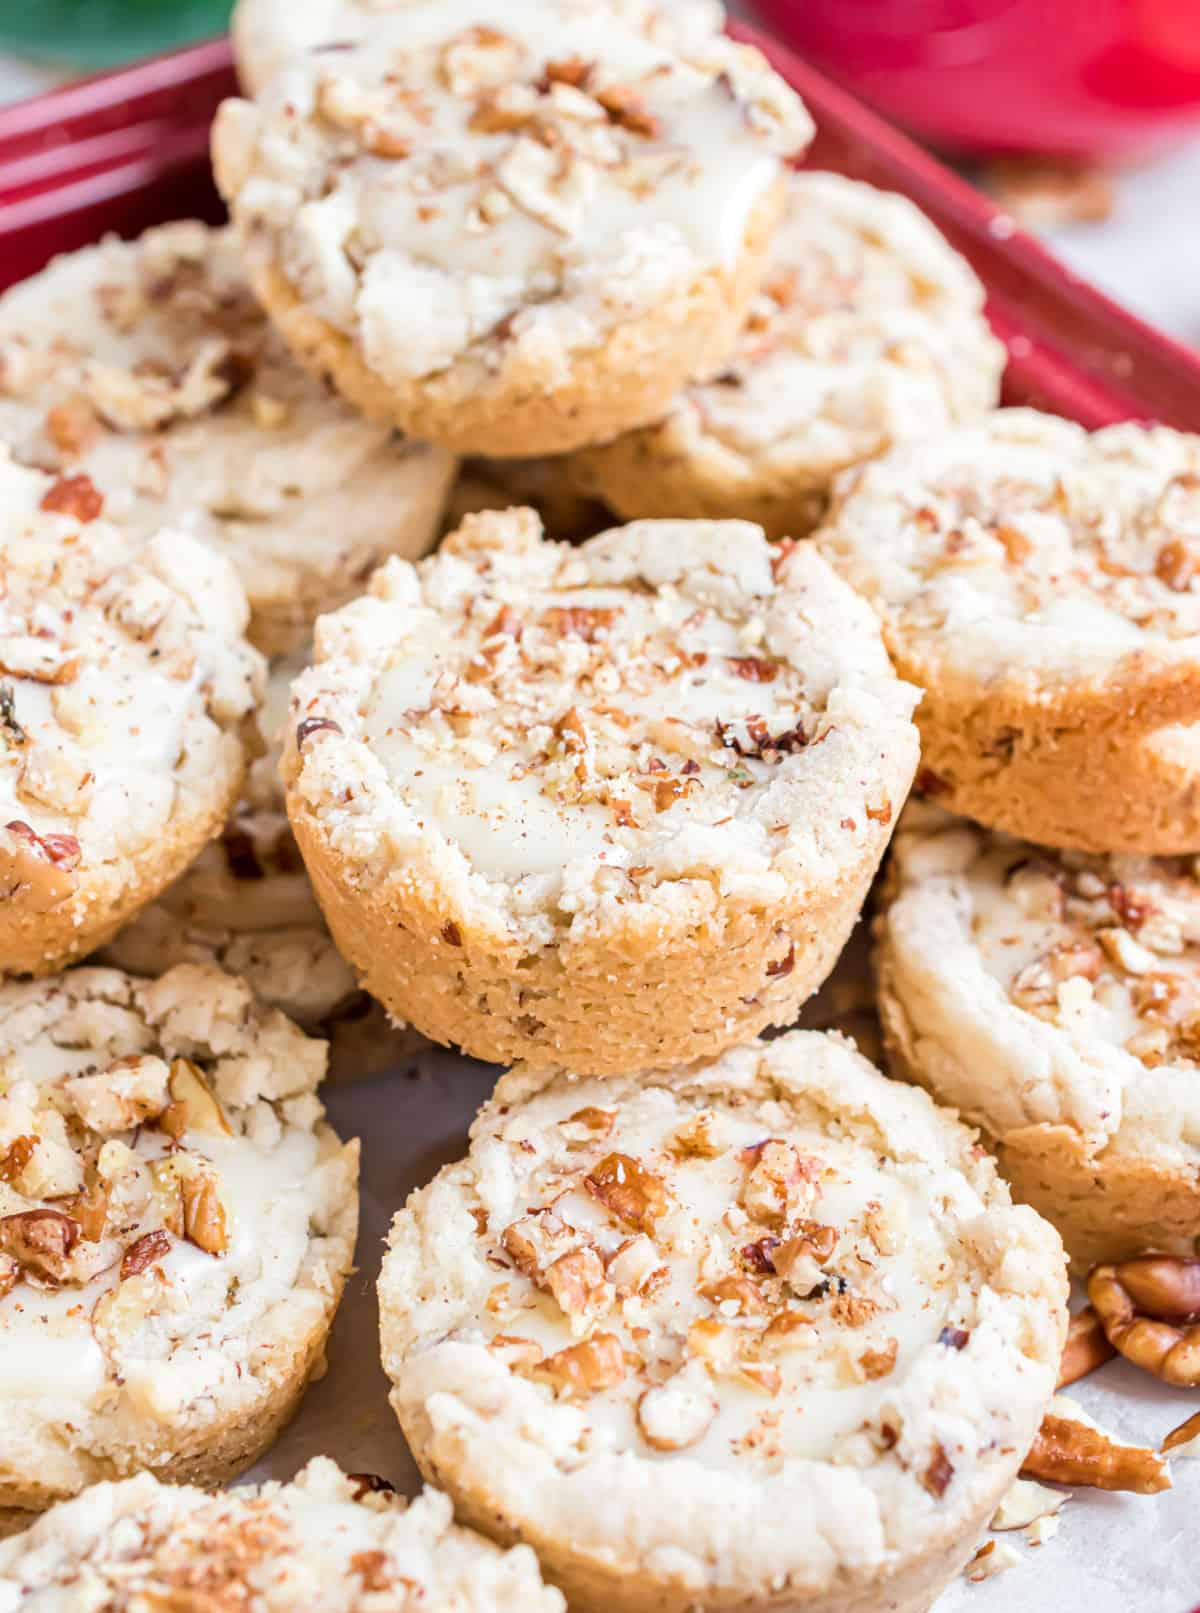 Stack of pecan eggnog cookies on a plate.